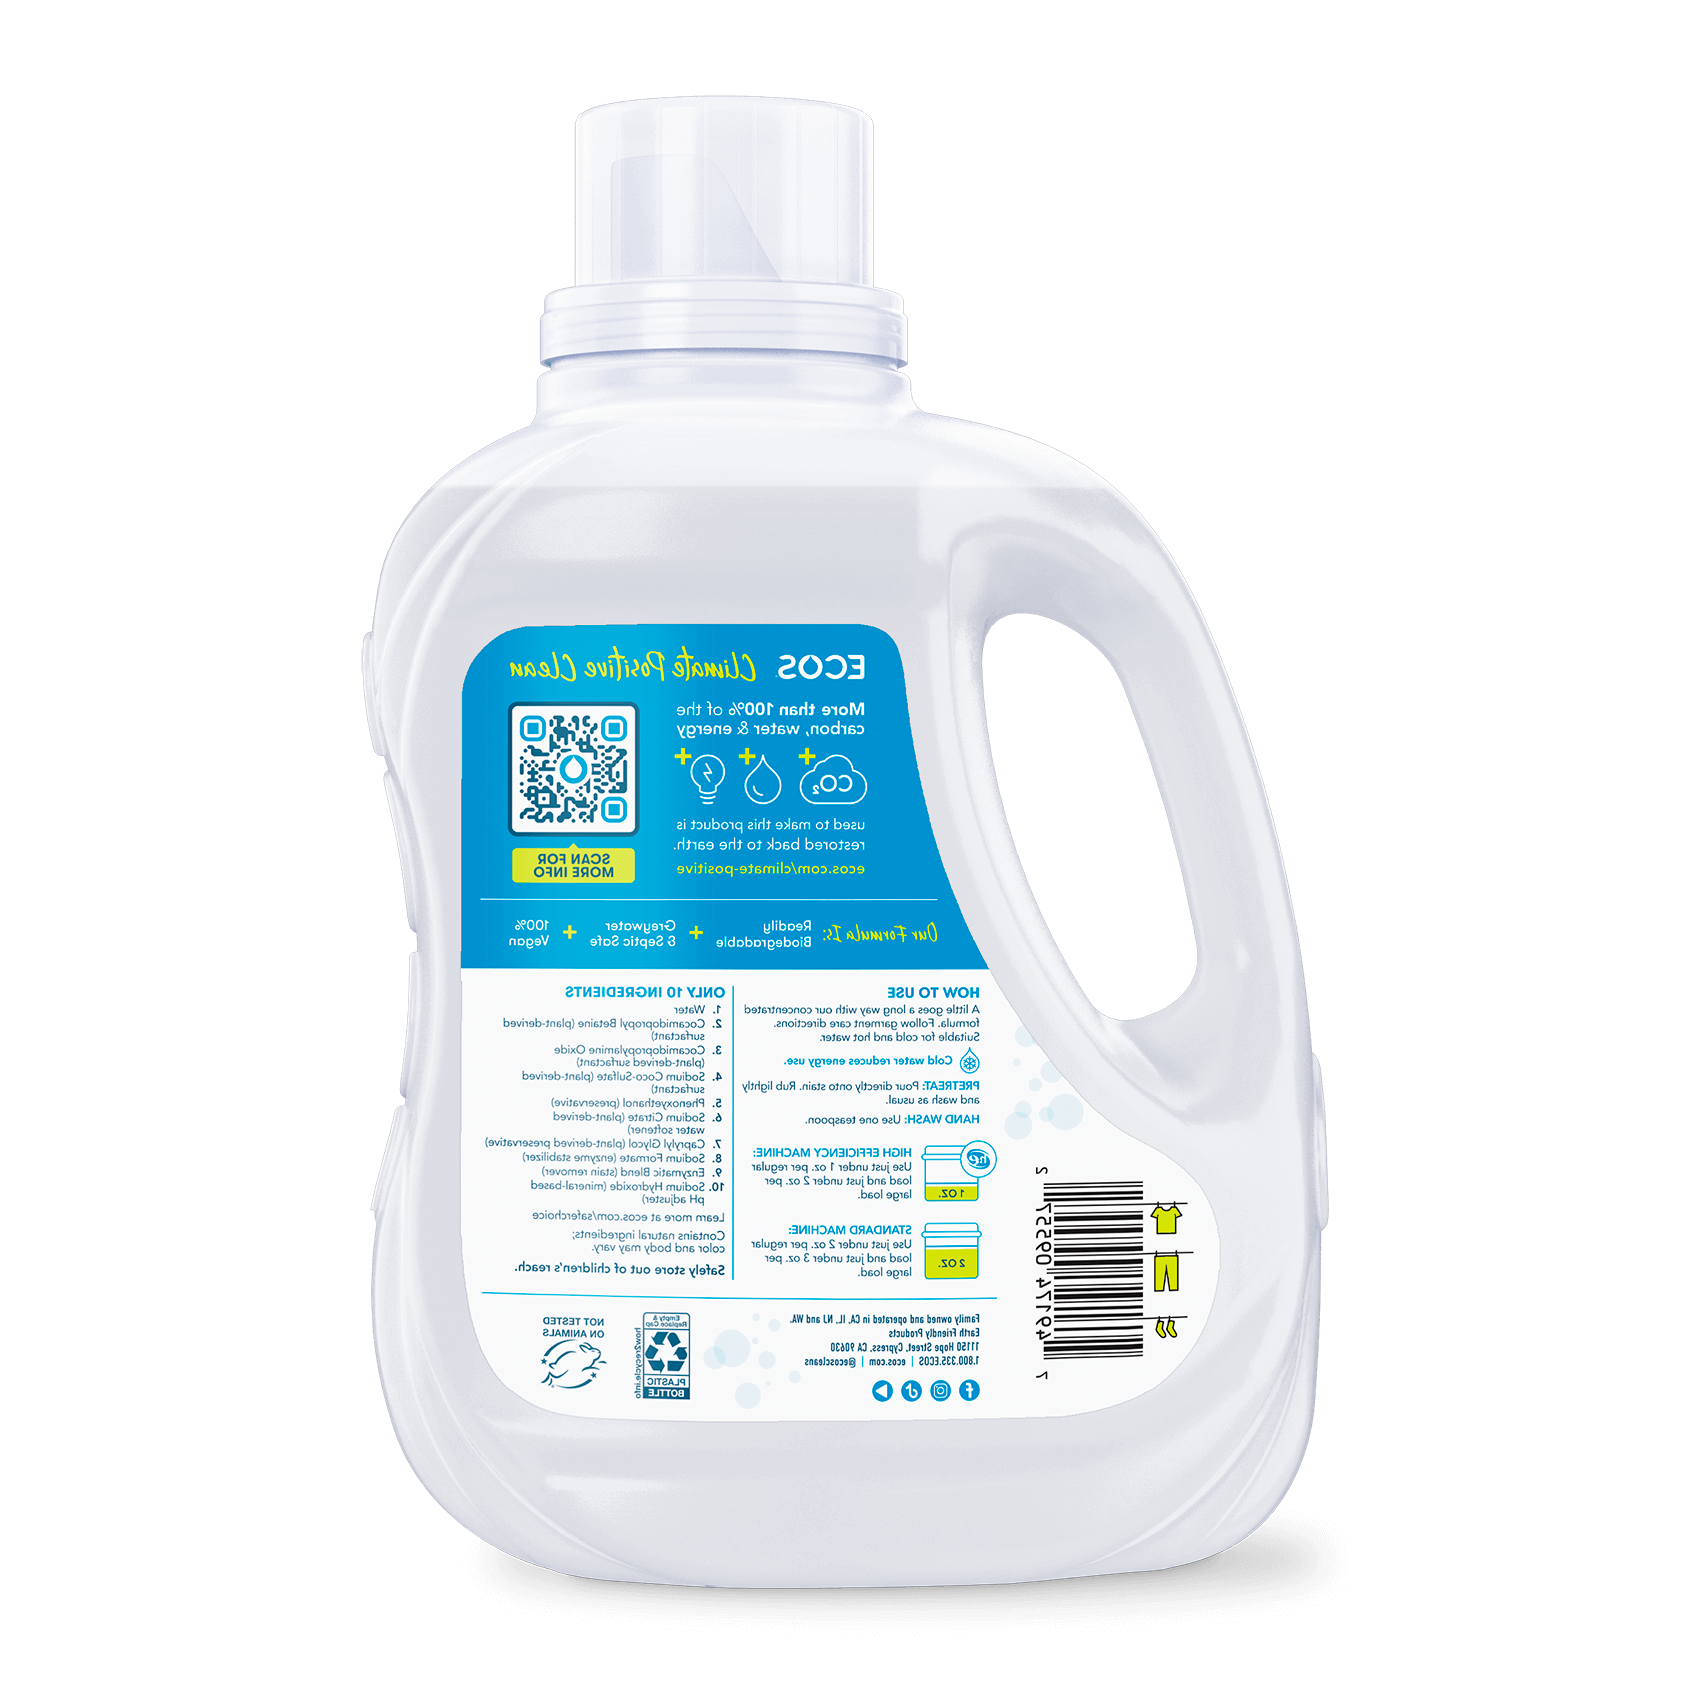 ECOS Laundry Detergent With Enzymes Free & Clear Back